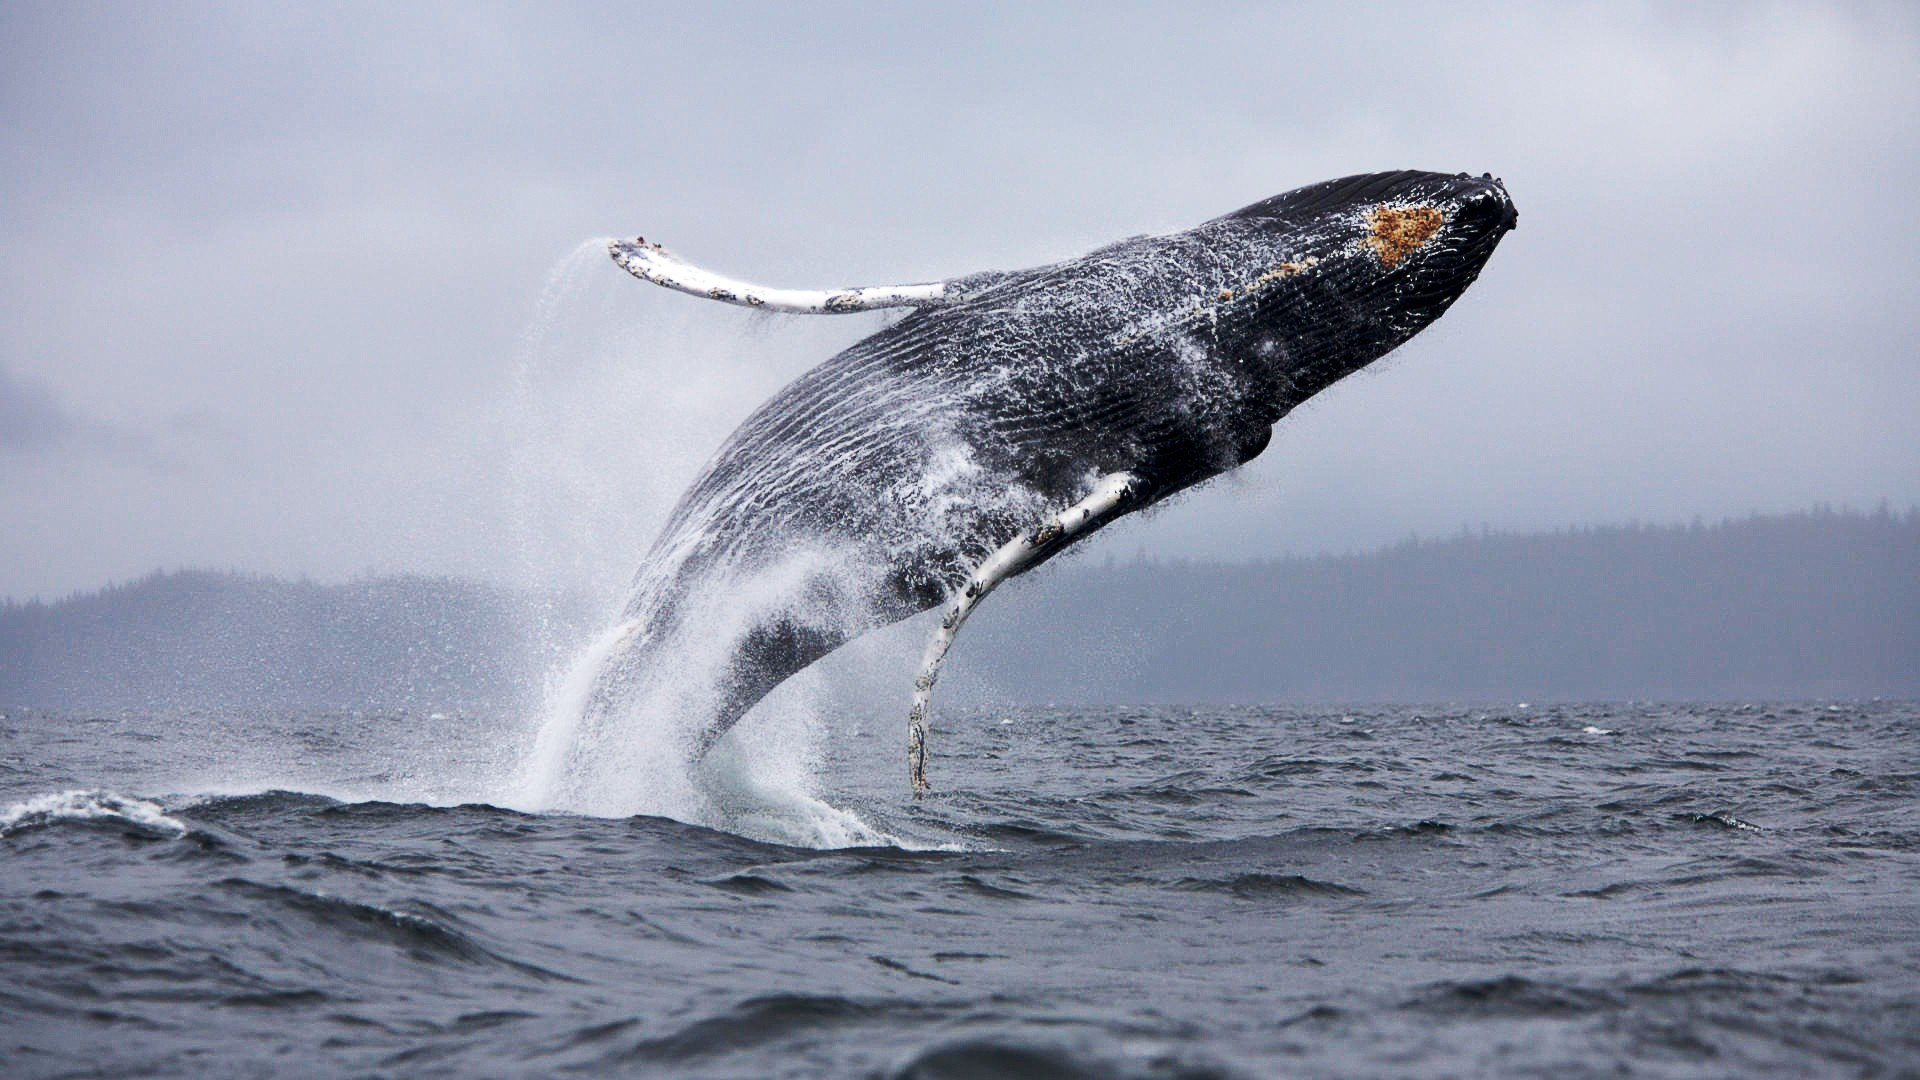 1920x1080 Wallpaper : animals, sea, water, nature, wildlife, humpback whale, ocean, wave, px, marine mammal, whales dolphins and porpoises, grey whale wallhaven 771303 HD Wallpapers